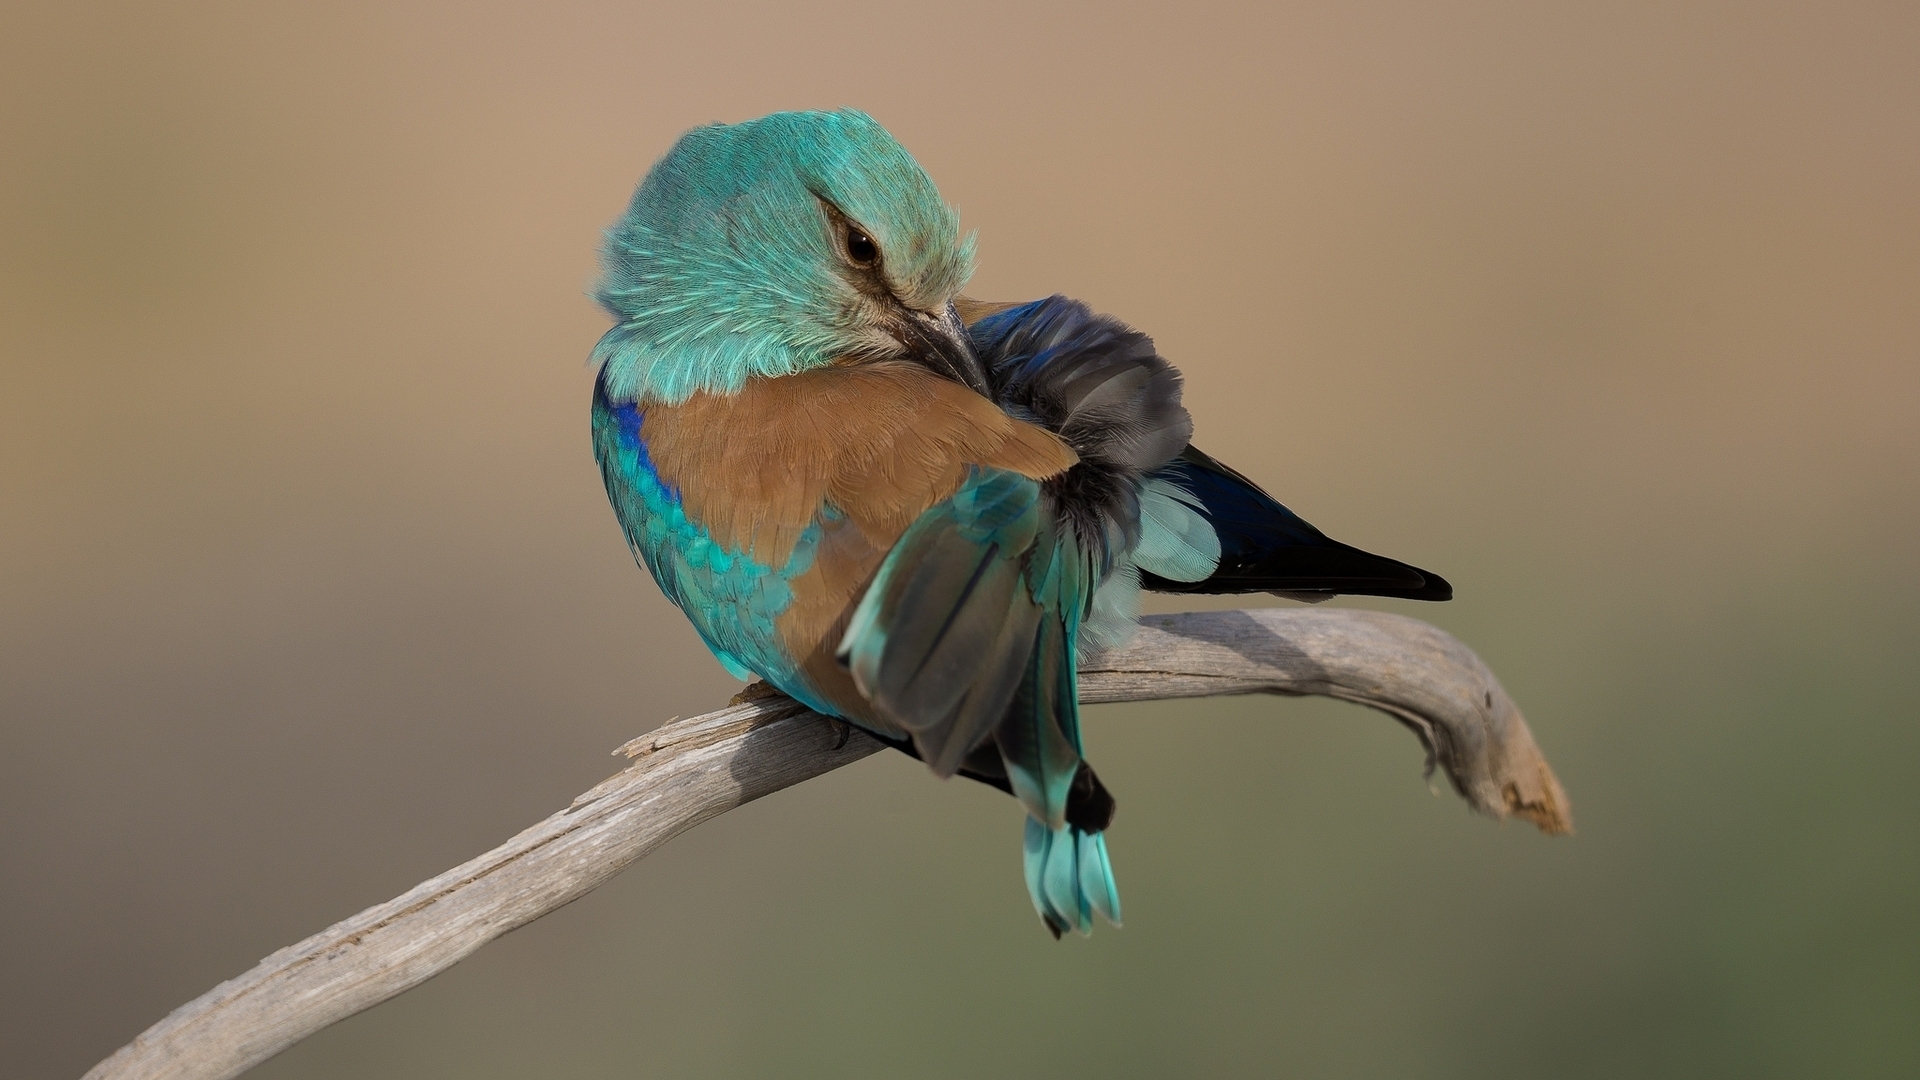 Turquoise Bird for 1920 x 1080 HDTV 1080p resolution